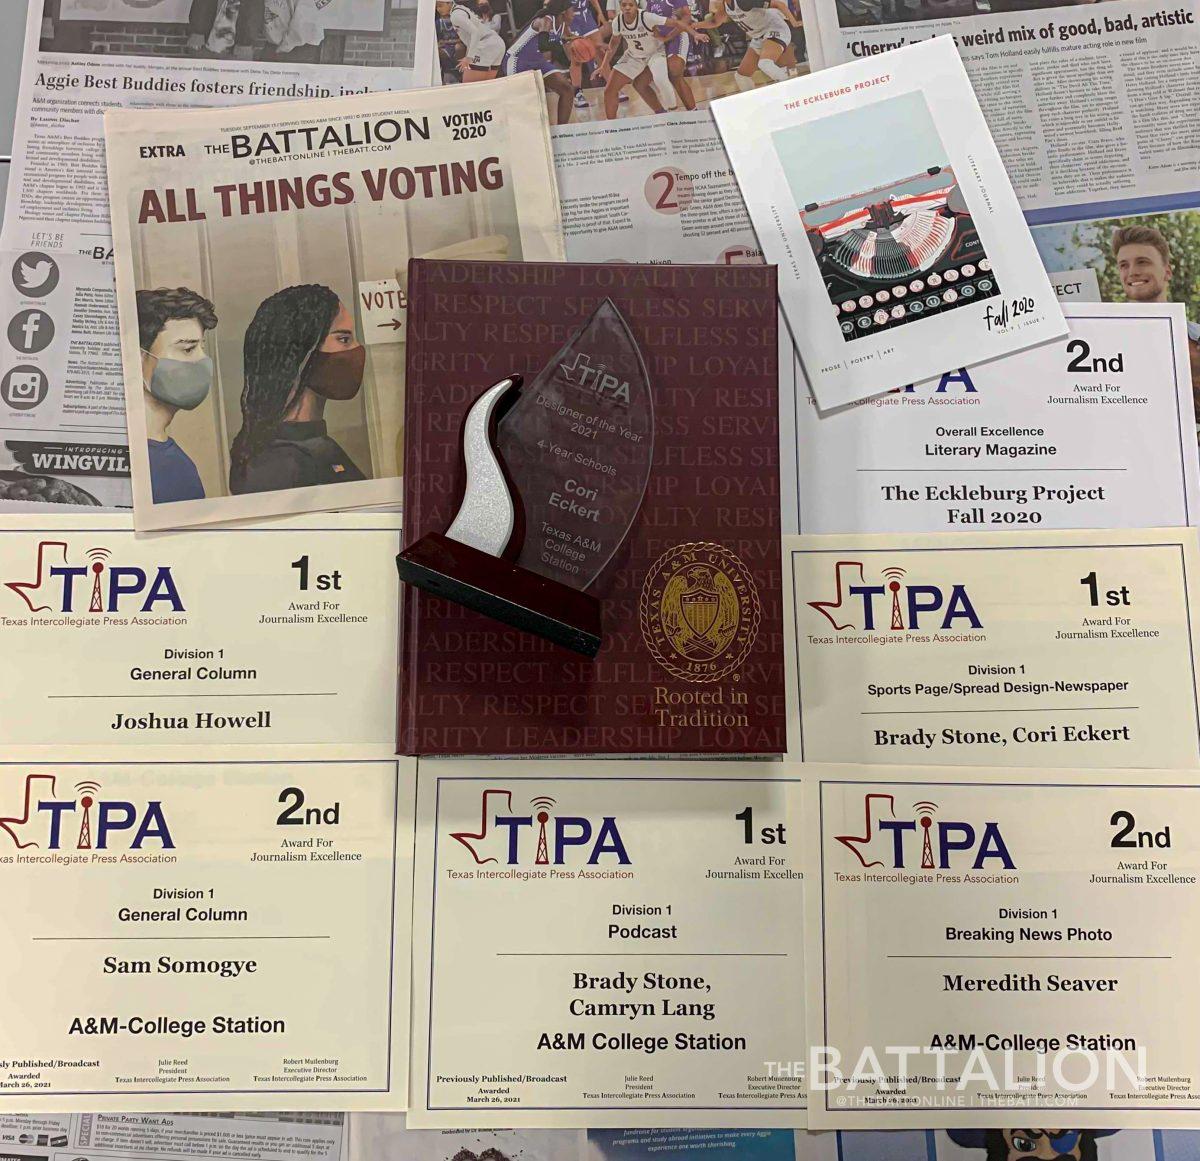 Staff from The Battalion received a total of 21 awards in recognition of their work in 2020 by the Texas Intercollegiate Press Association.